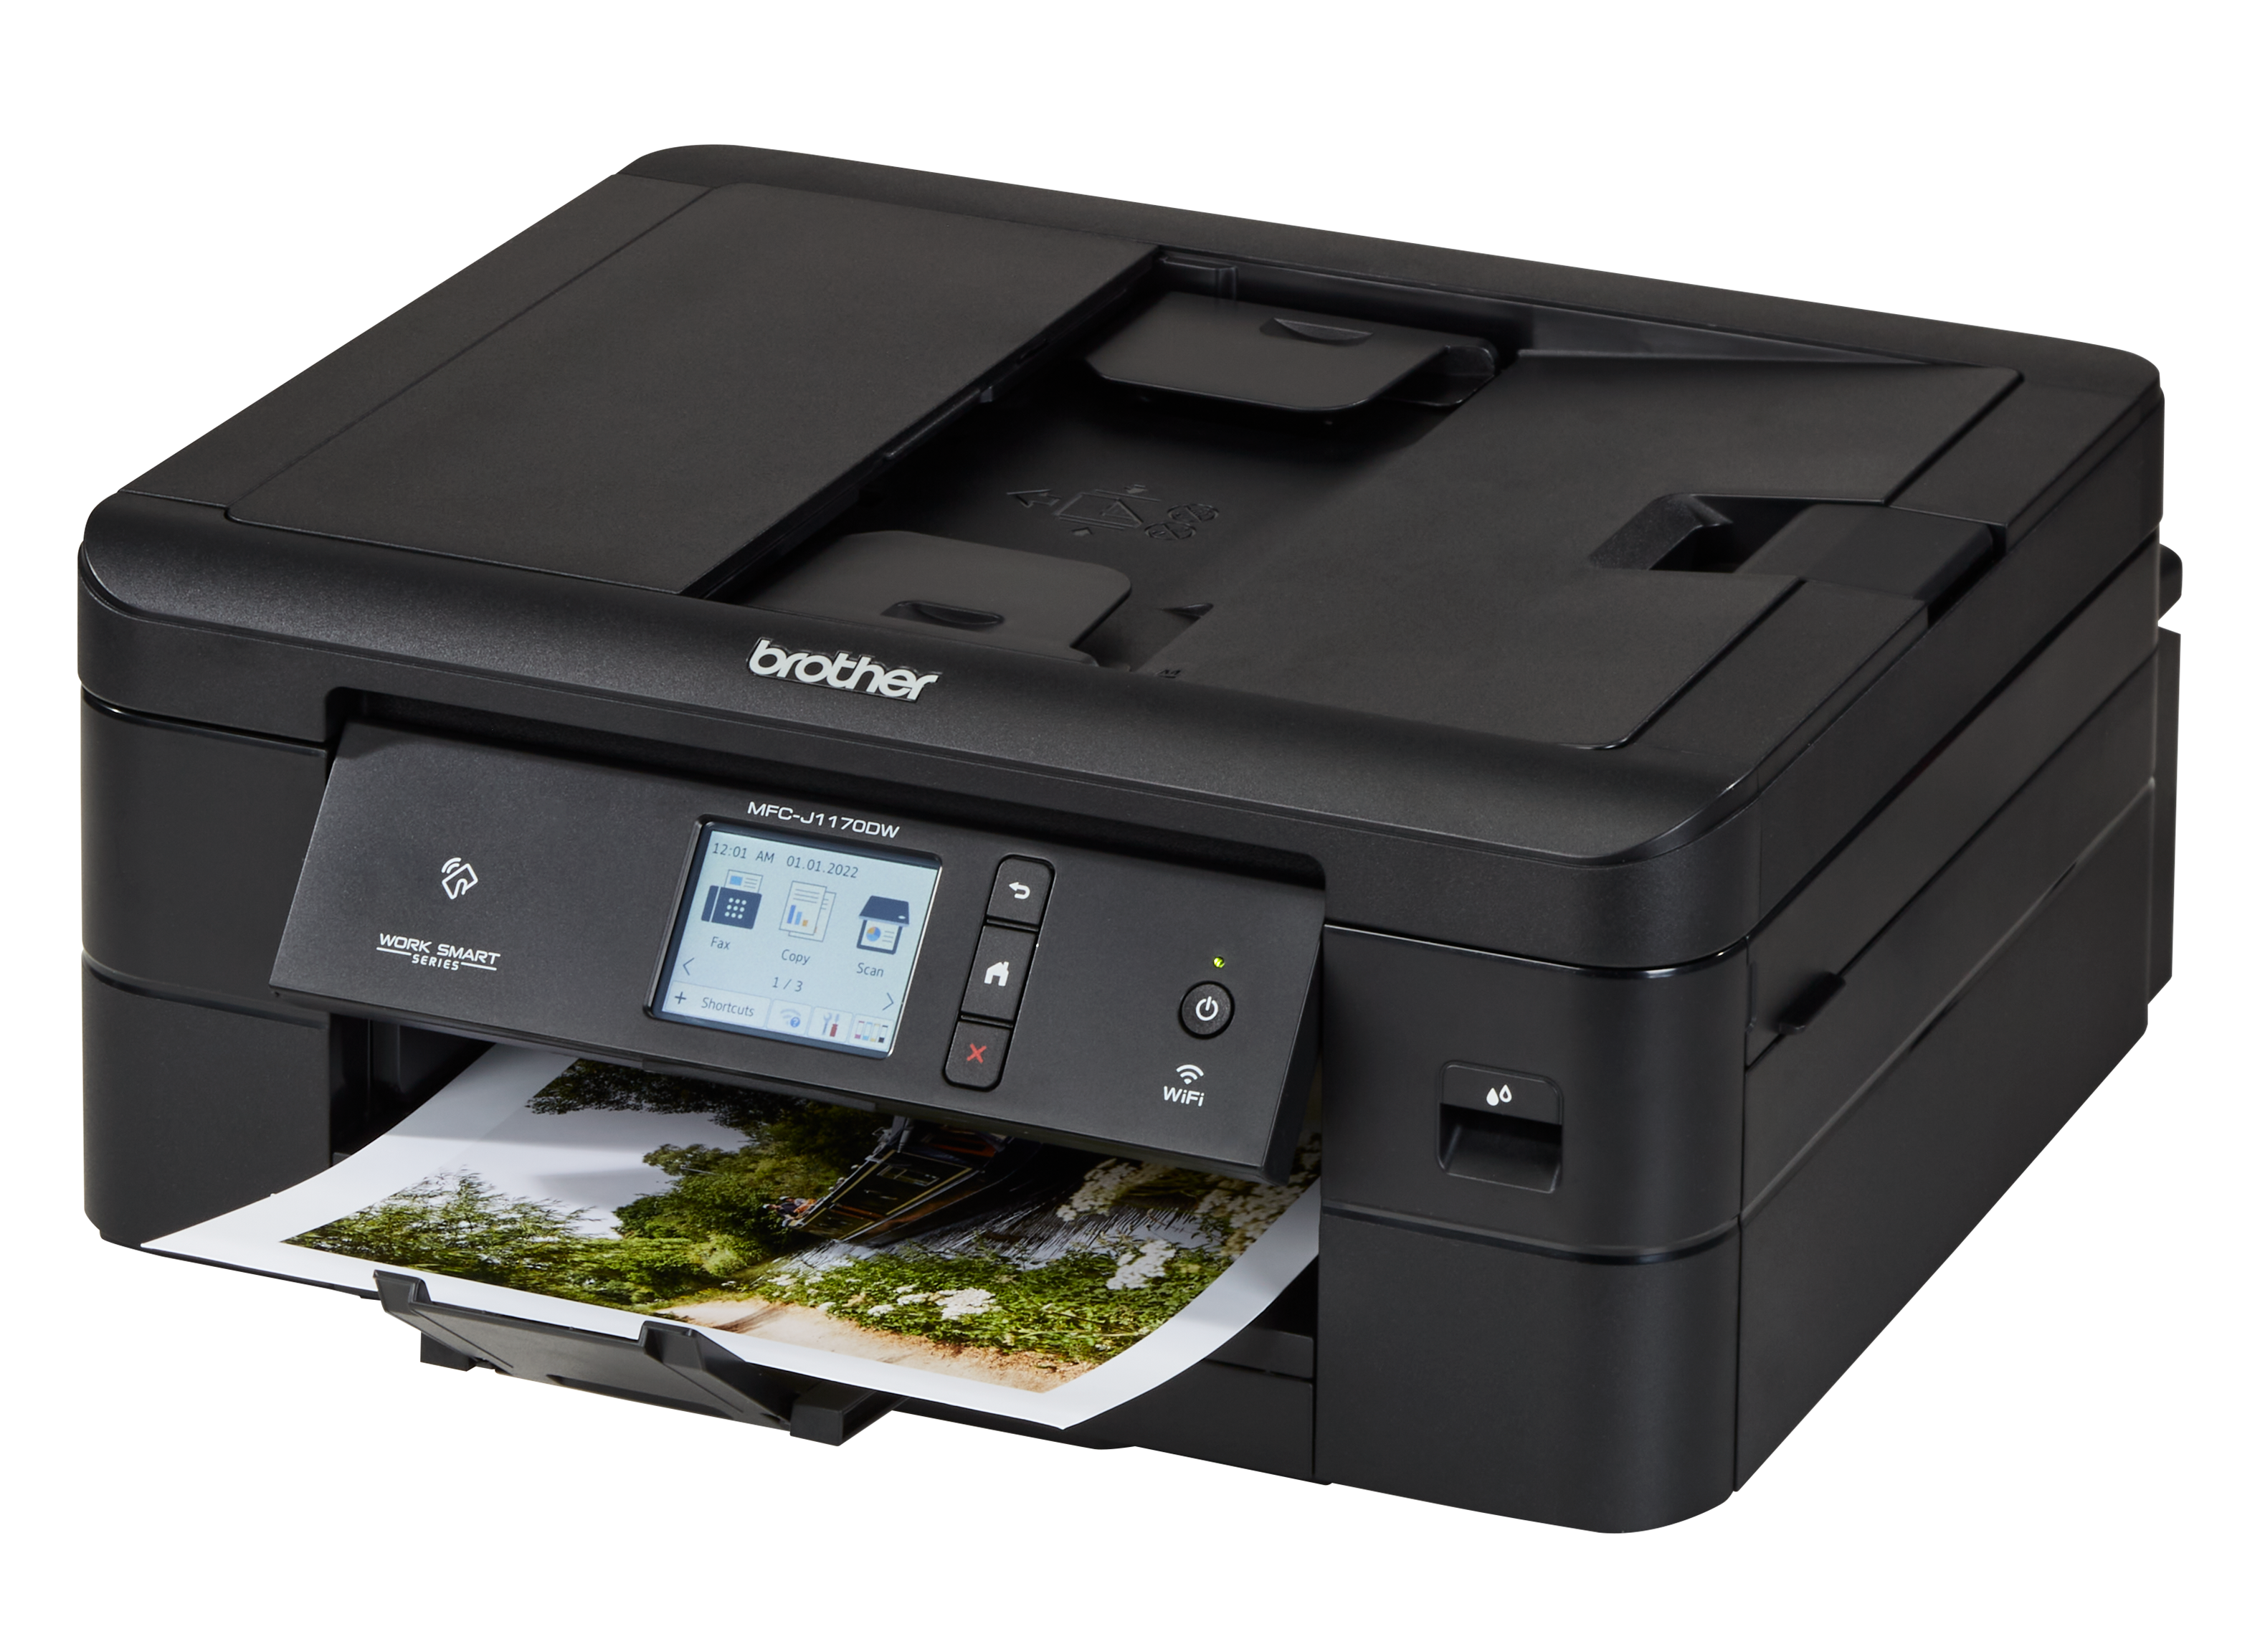 Brother MFC-J1170DW Printer Review - Consumer Reports